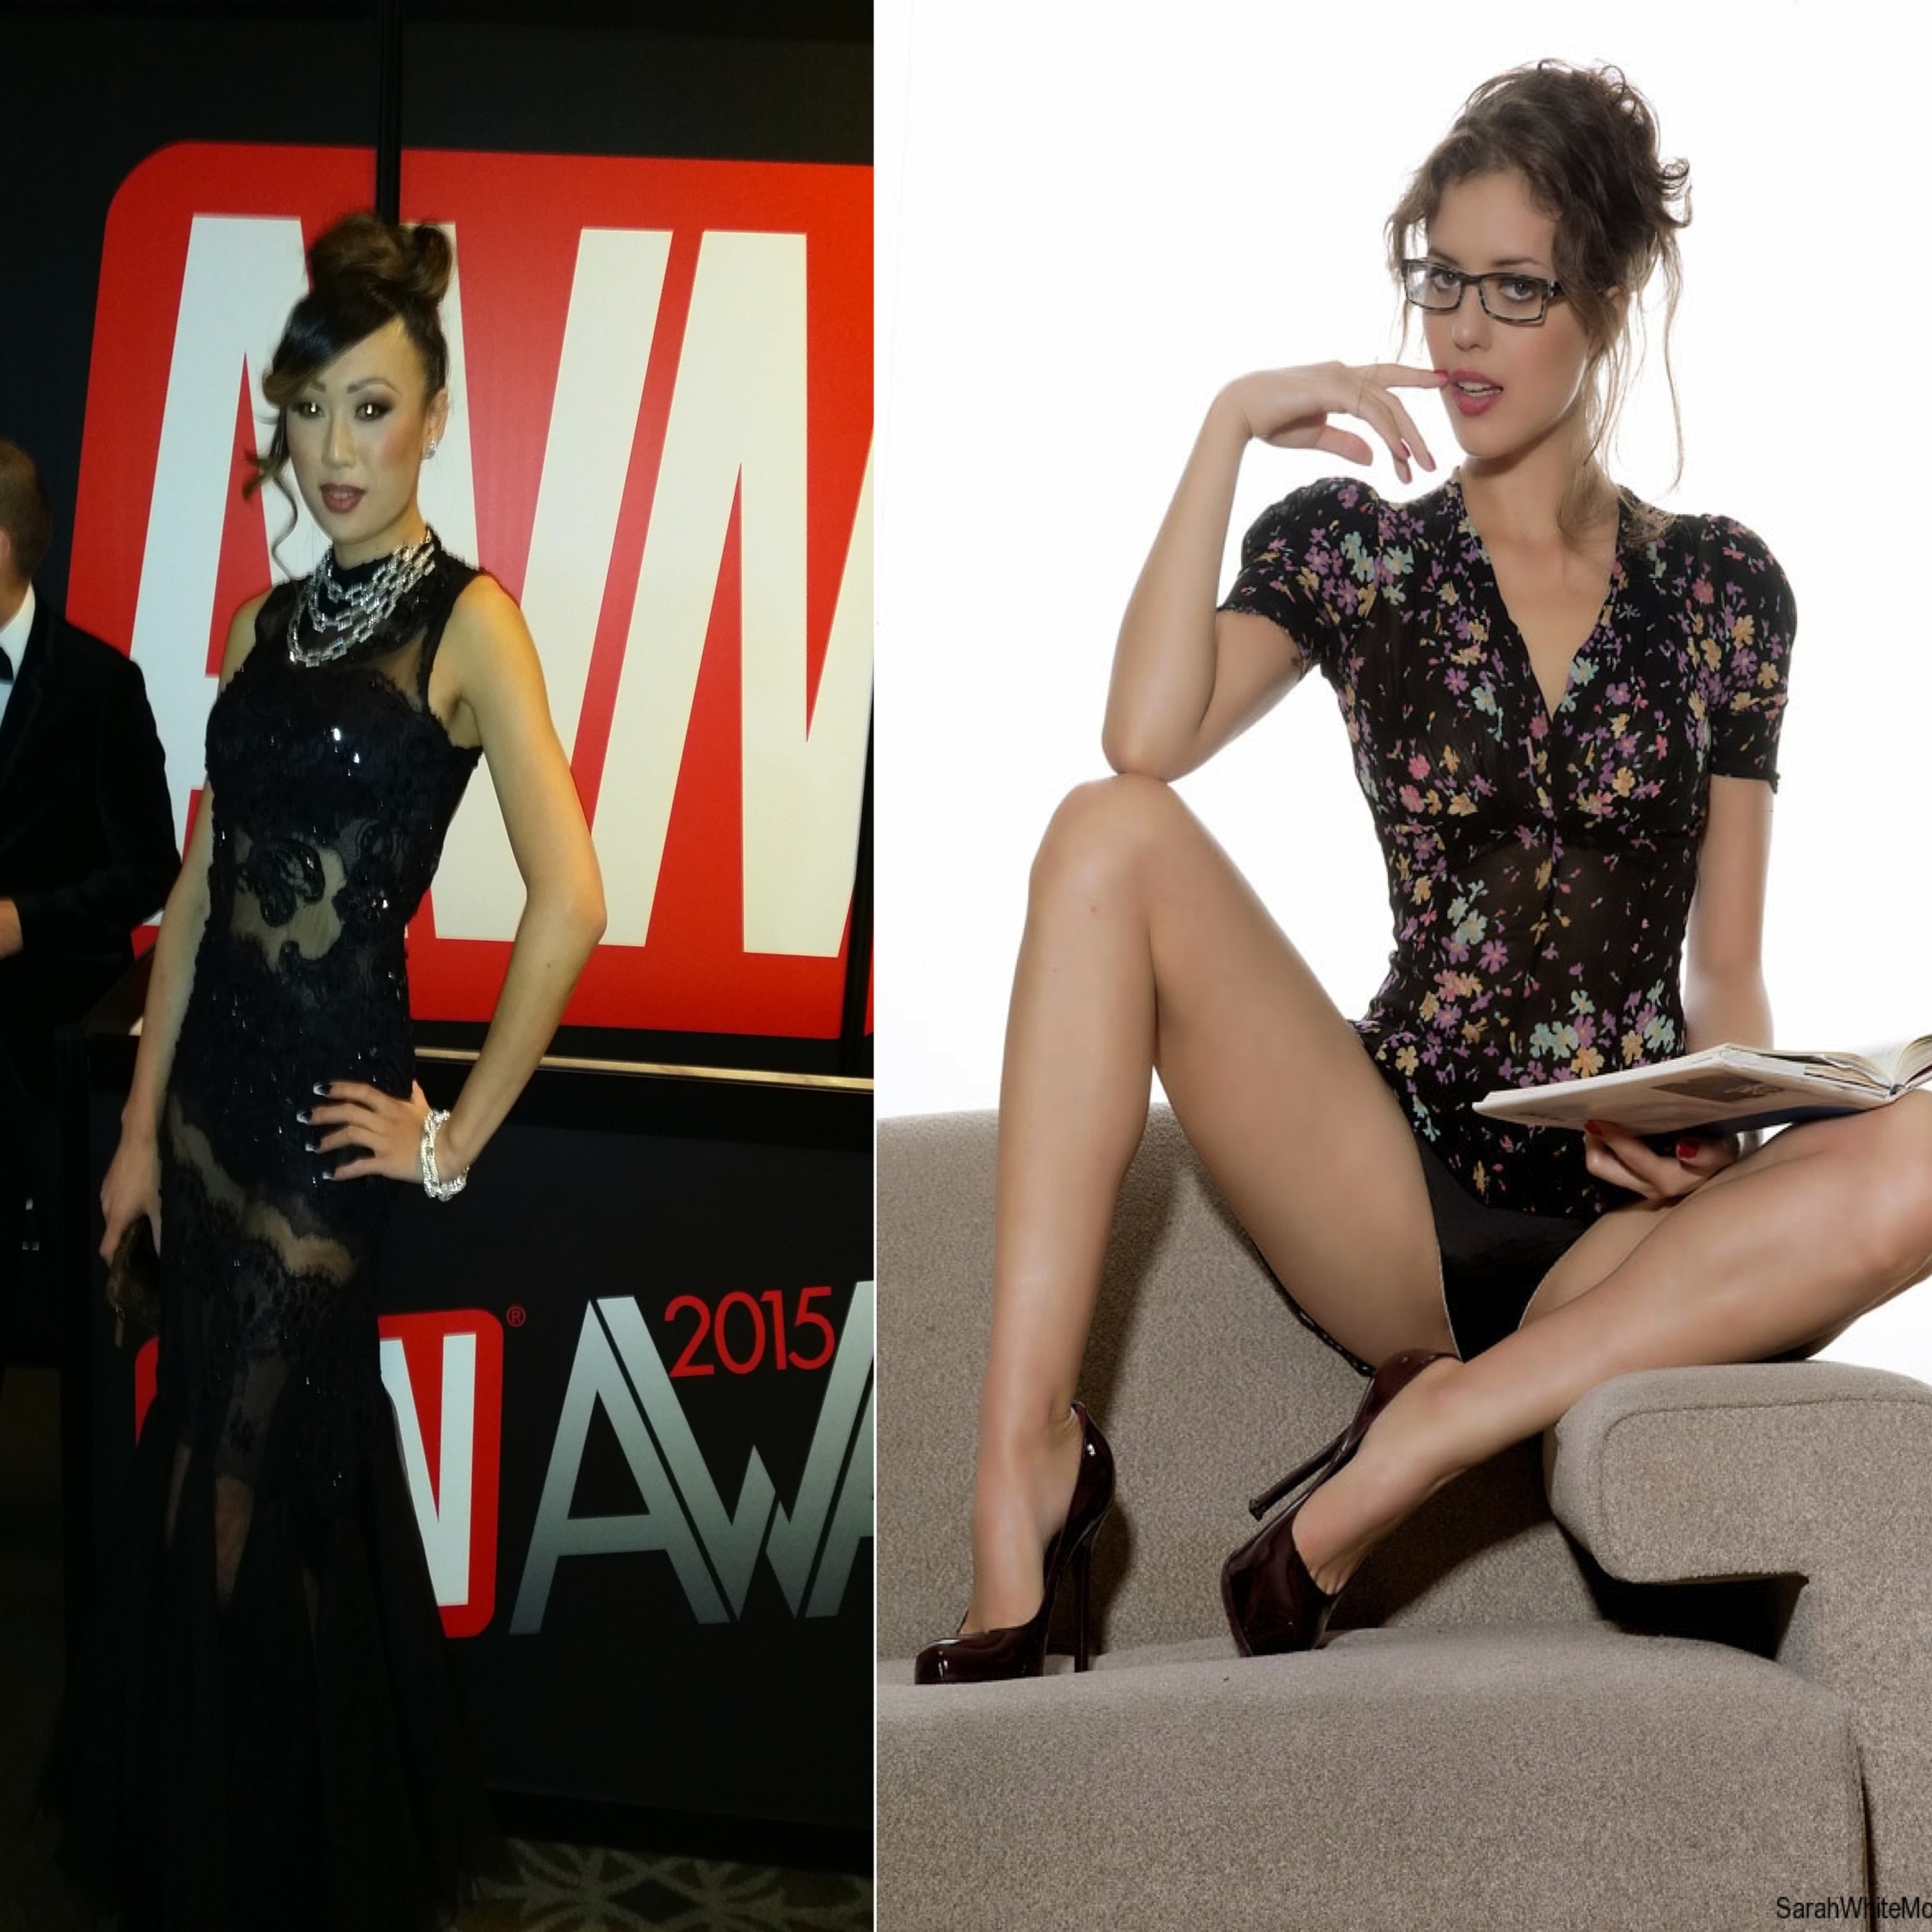 Ep 14 Porn Star Venus Lux and Playboys Naked Therapist Sarah White • The Week In